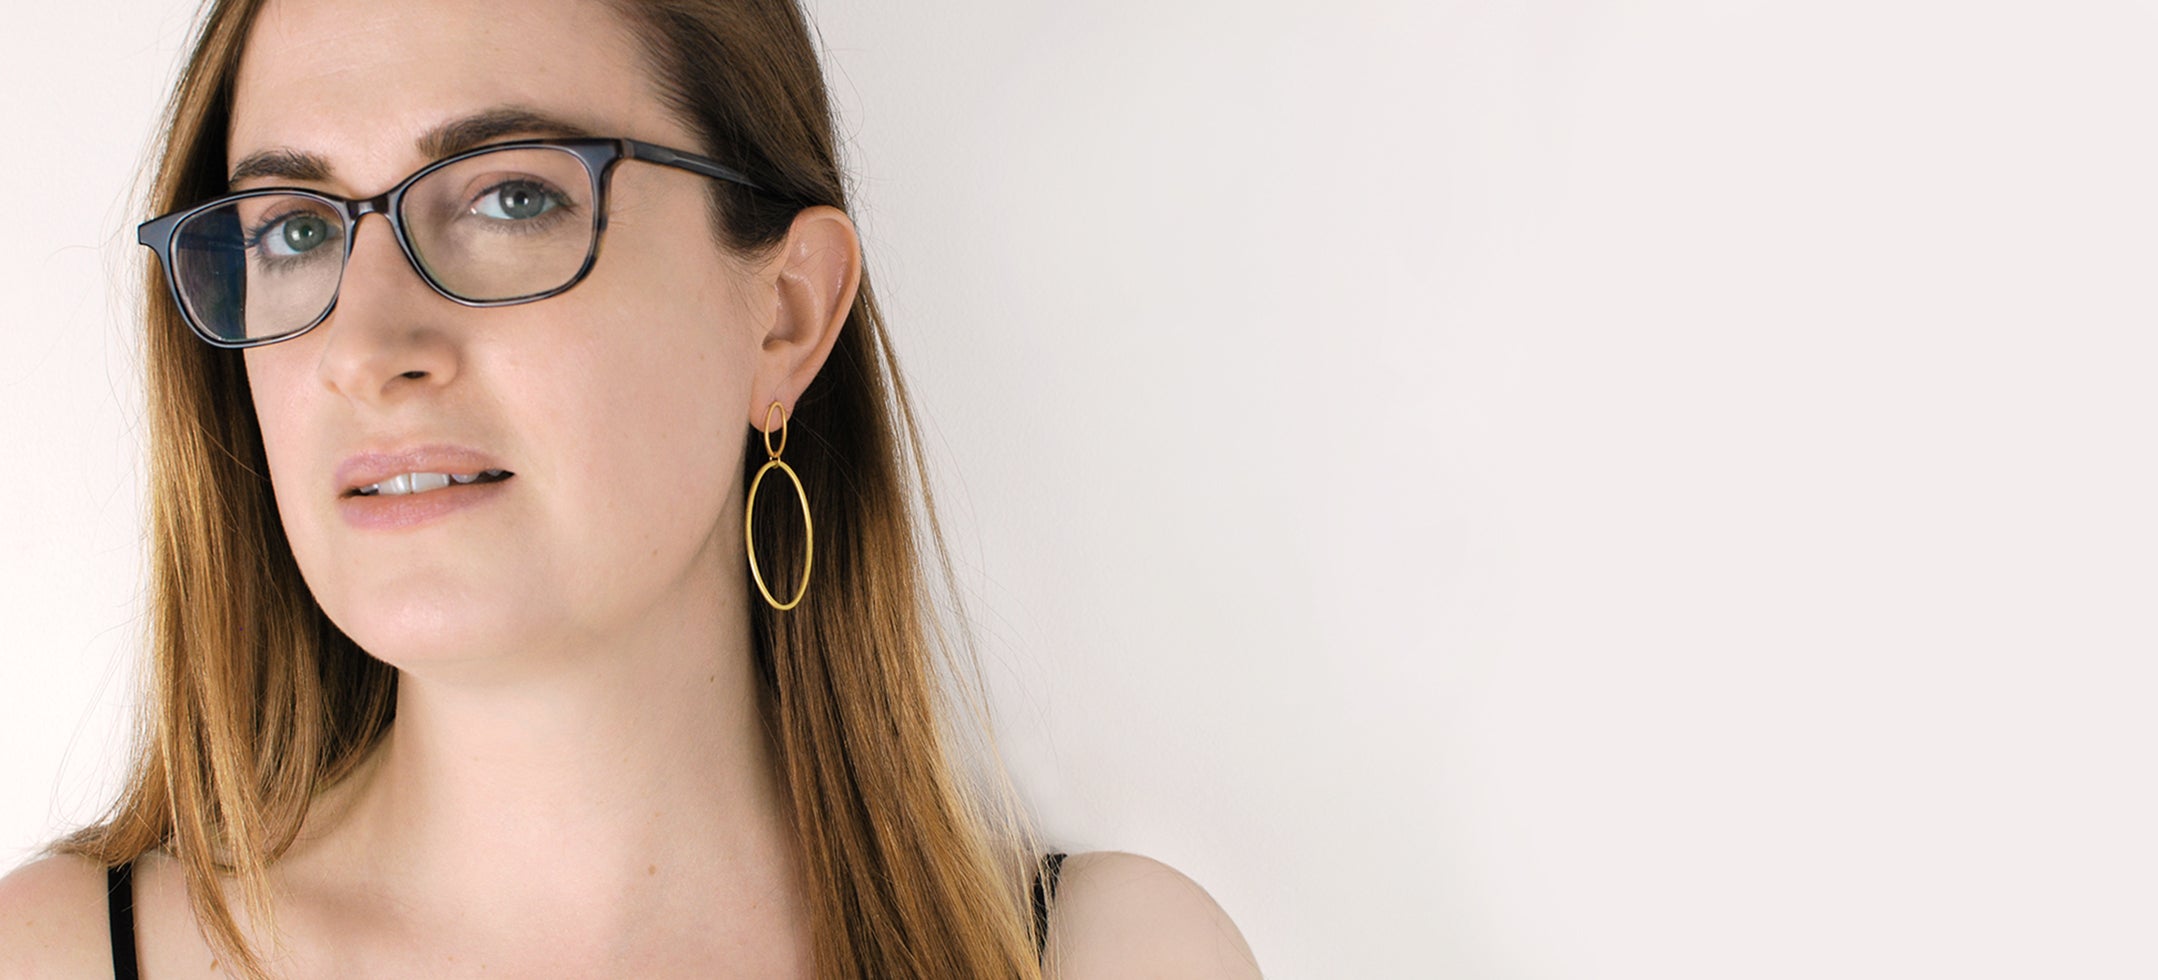 White woman wearing glasses and a handmade gold hoop earring